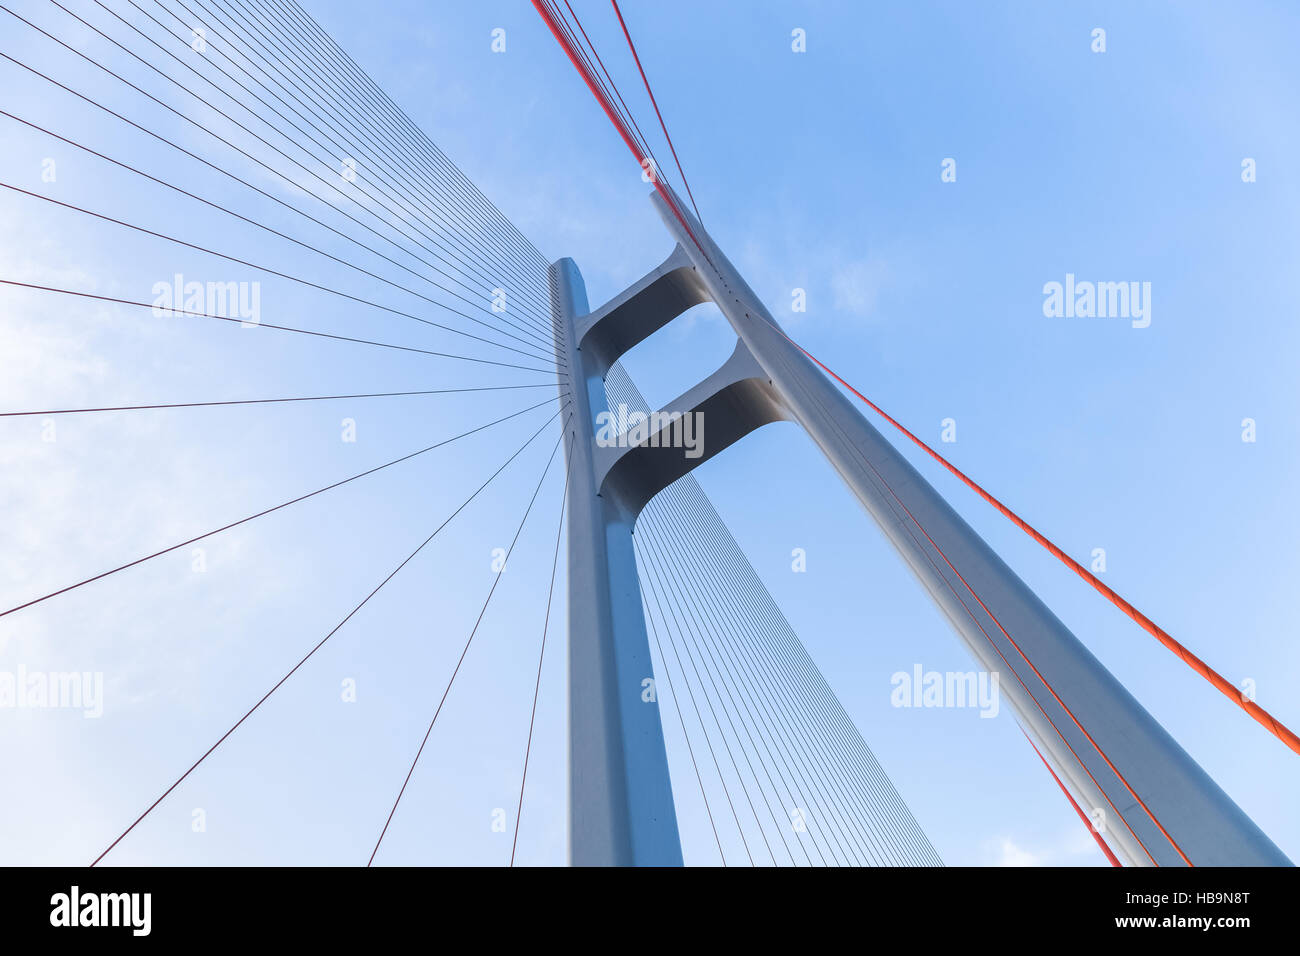 the cable stayed bridge closeup Stock Photo